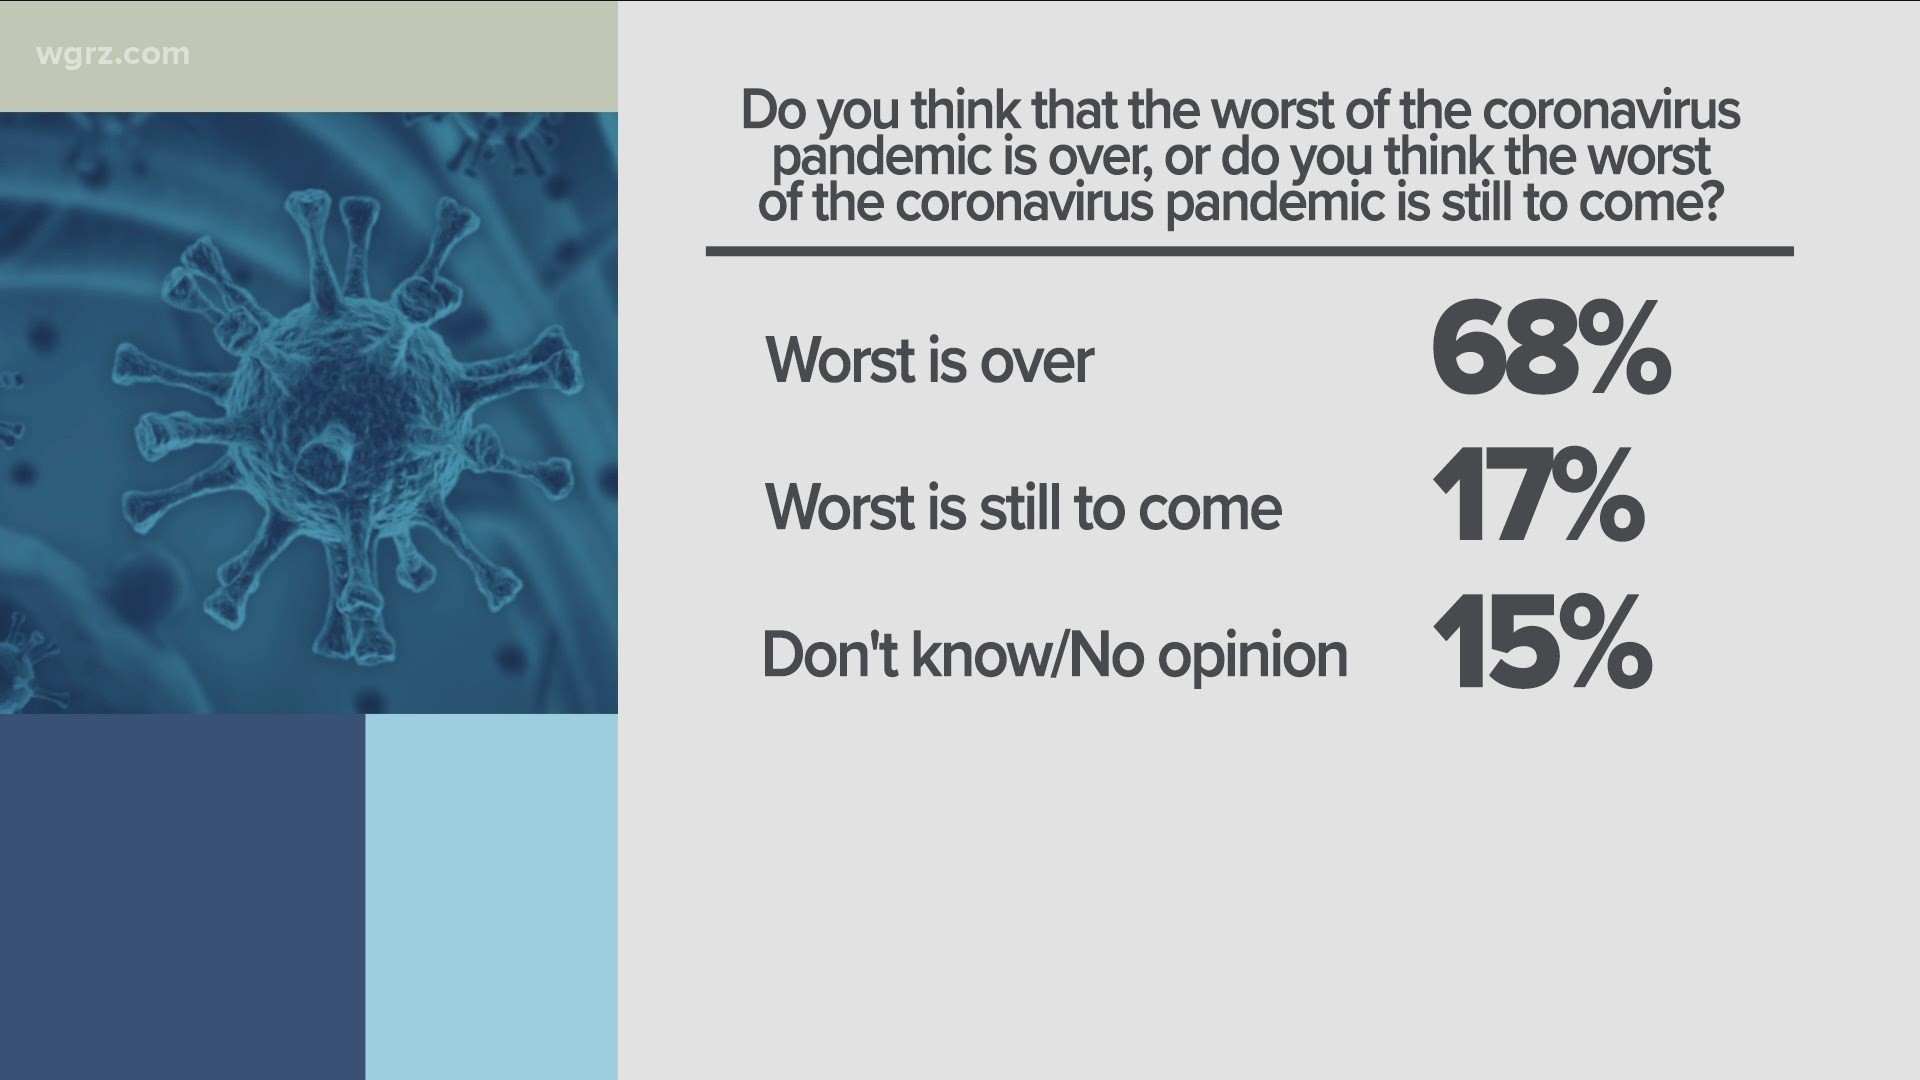 Siena College is out with a new poll today showing how New Yorkers feel about the pandemic at this point.